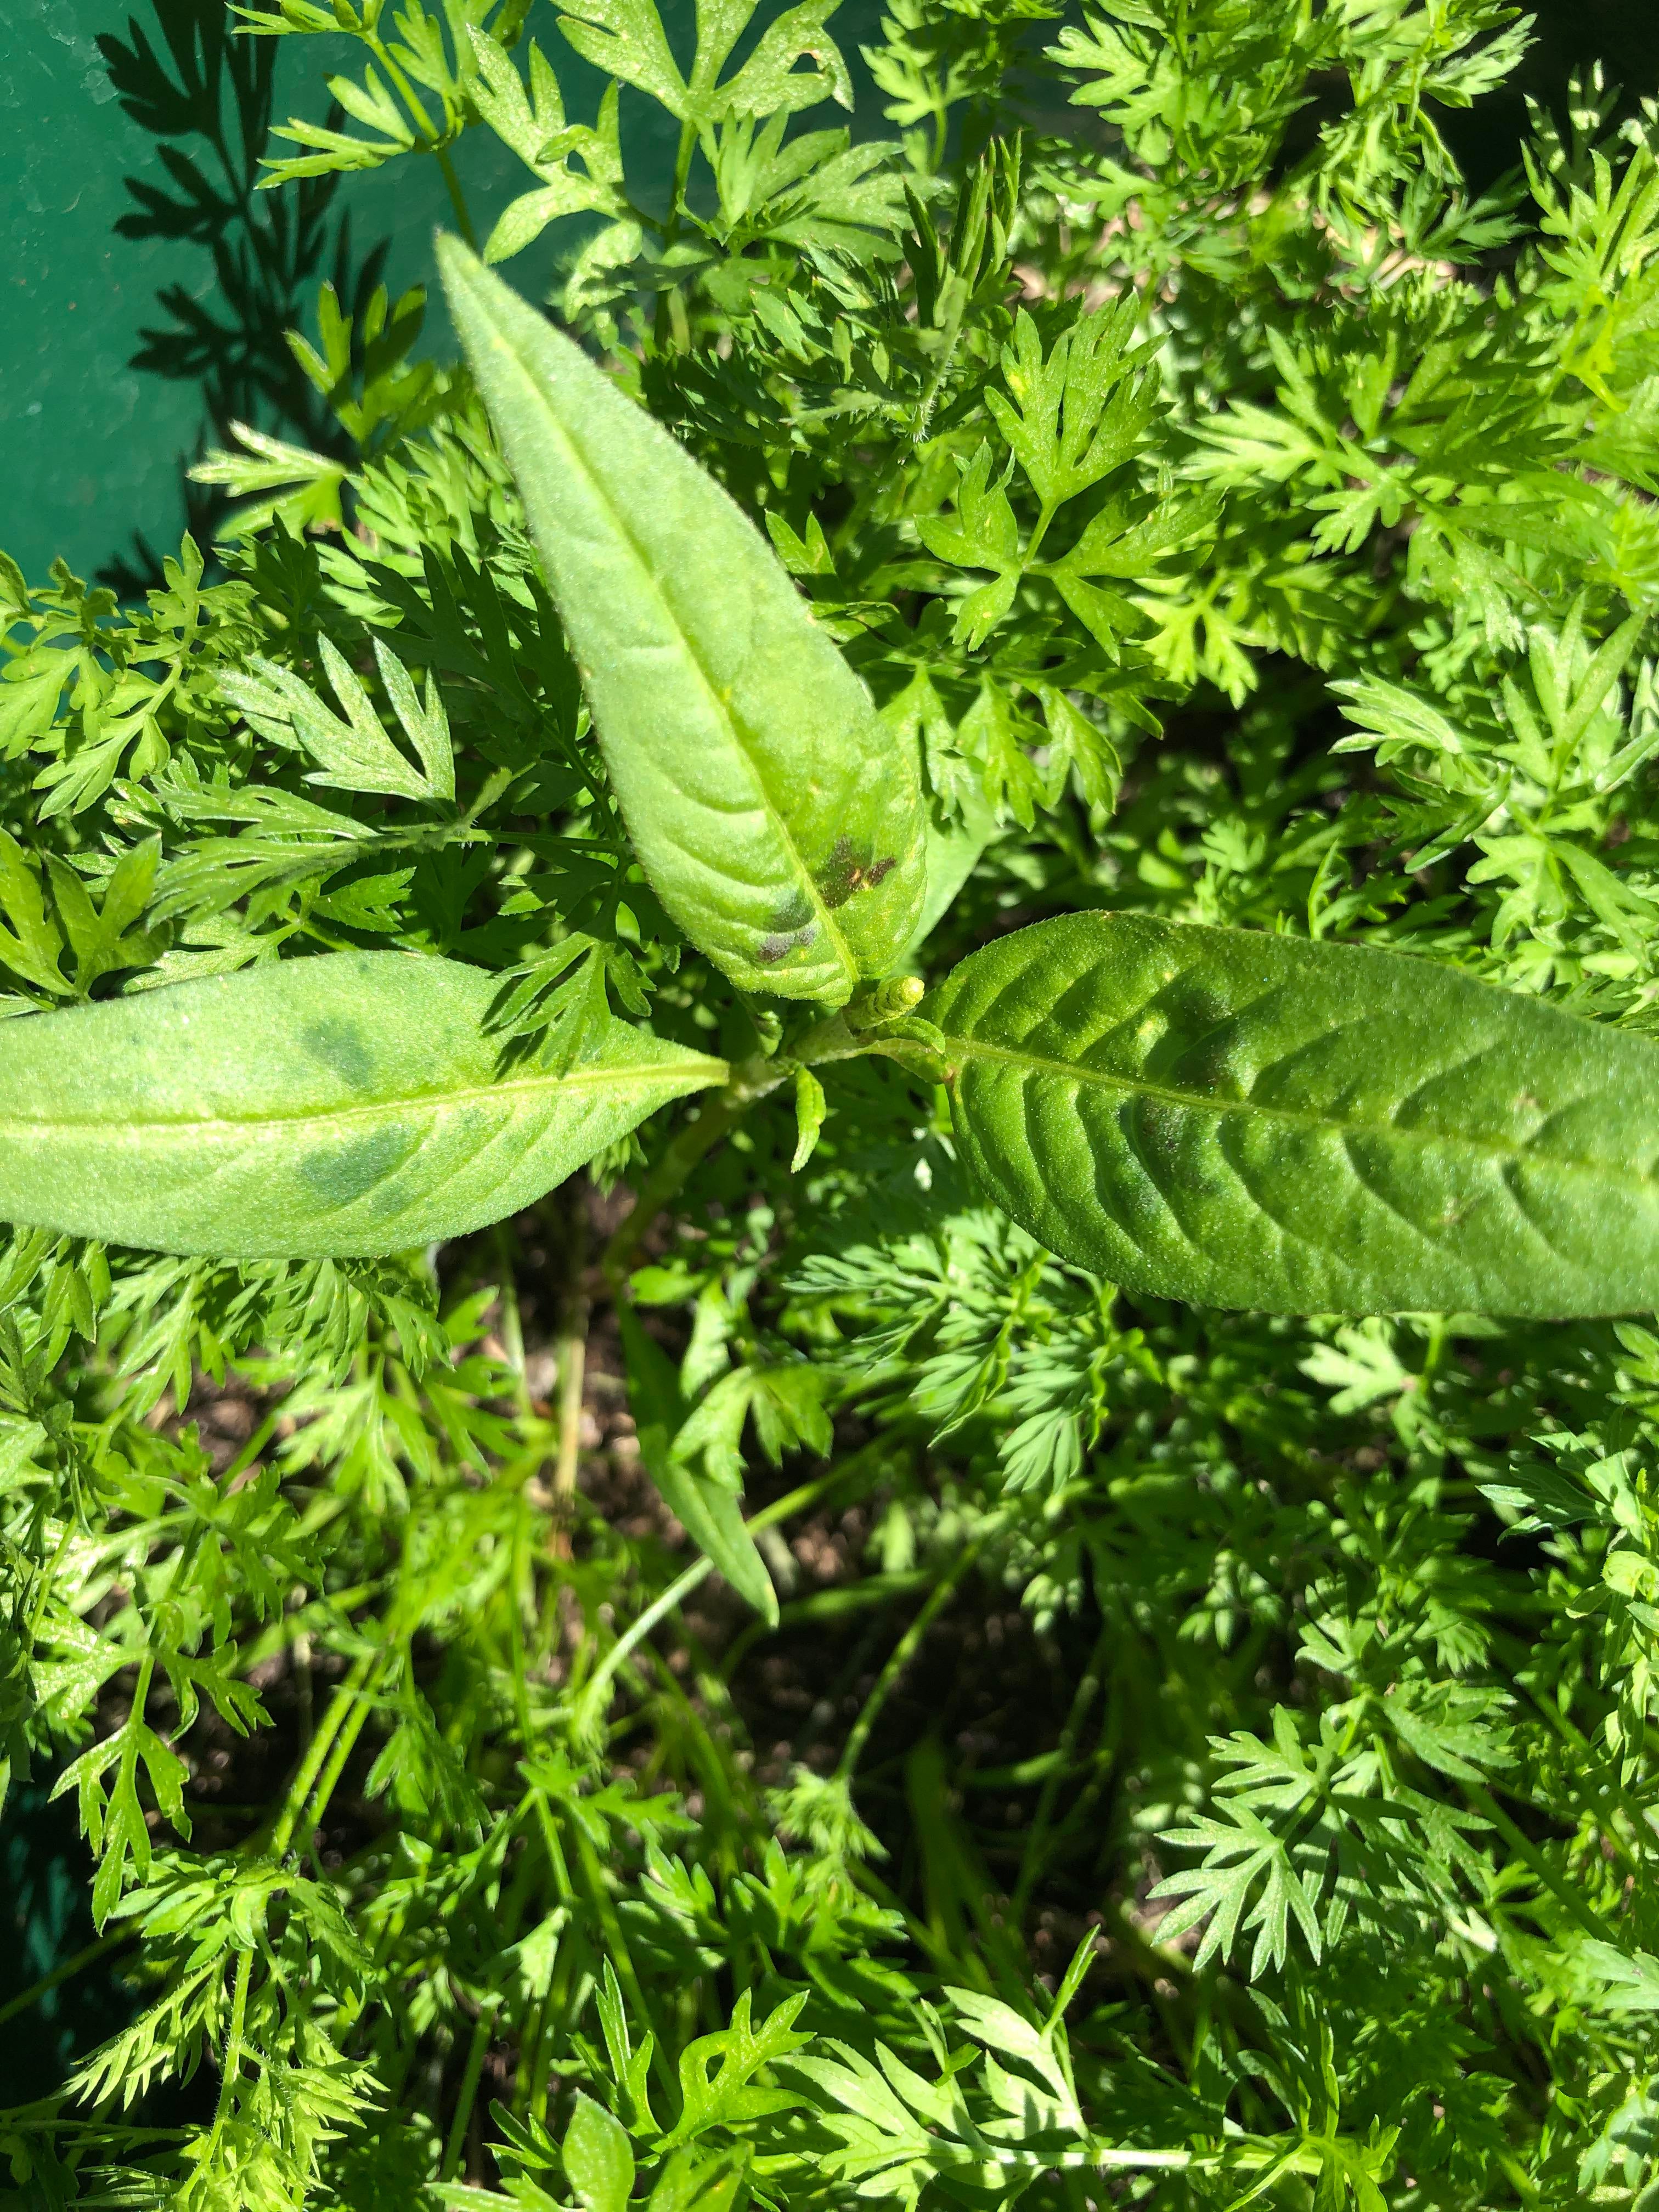 I have this weird plant growing with my carrots, now the leaves look What Does Carrot Leaves Look Like